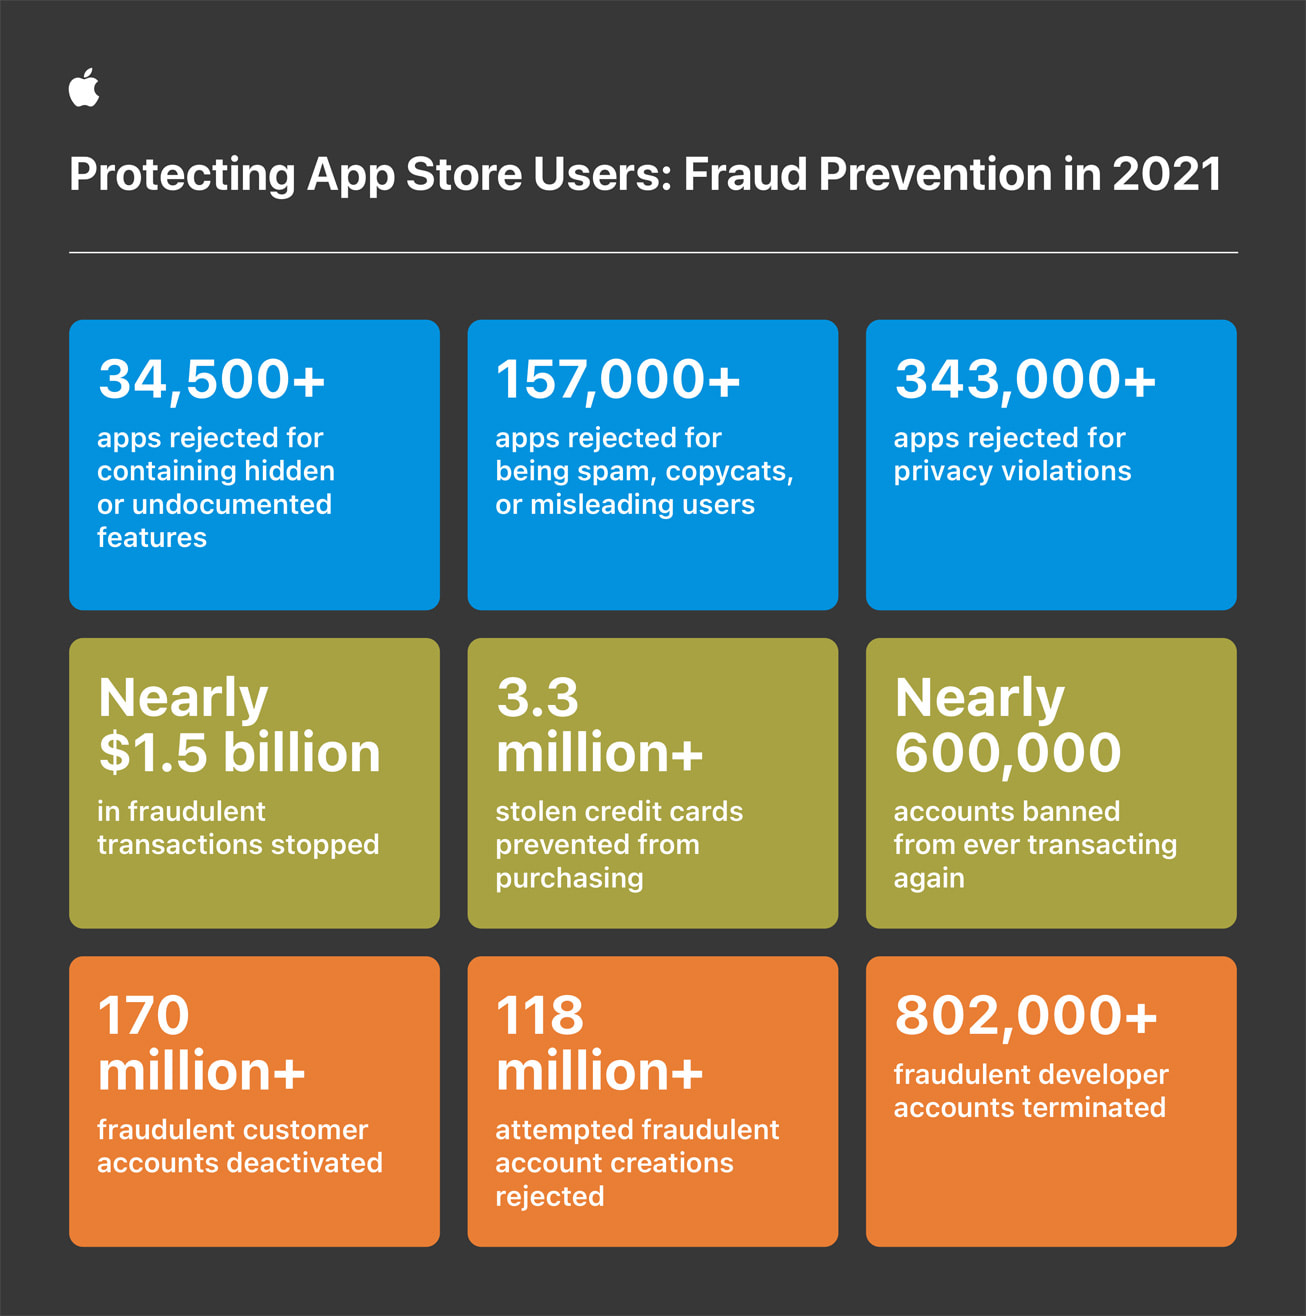 Apple-WWDC22-fraud-prevention-infographic_inline.jpg.large_2x